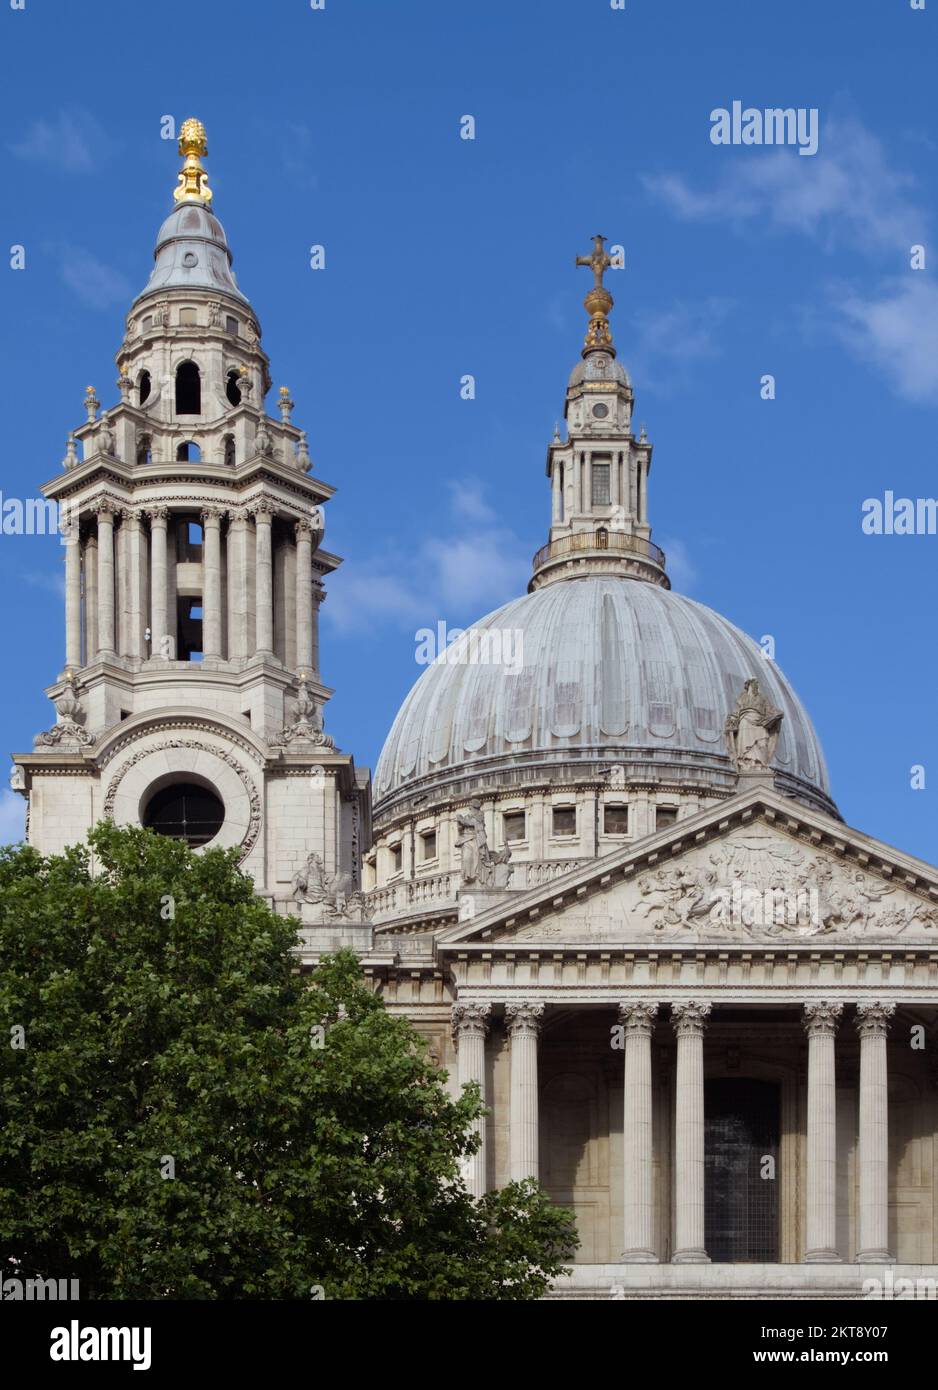 West Front Elevation, Collonaded Entrance And Dome Of Saint Pauls Cathedral London UK Stock Photo